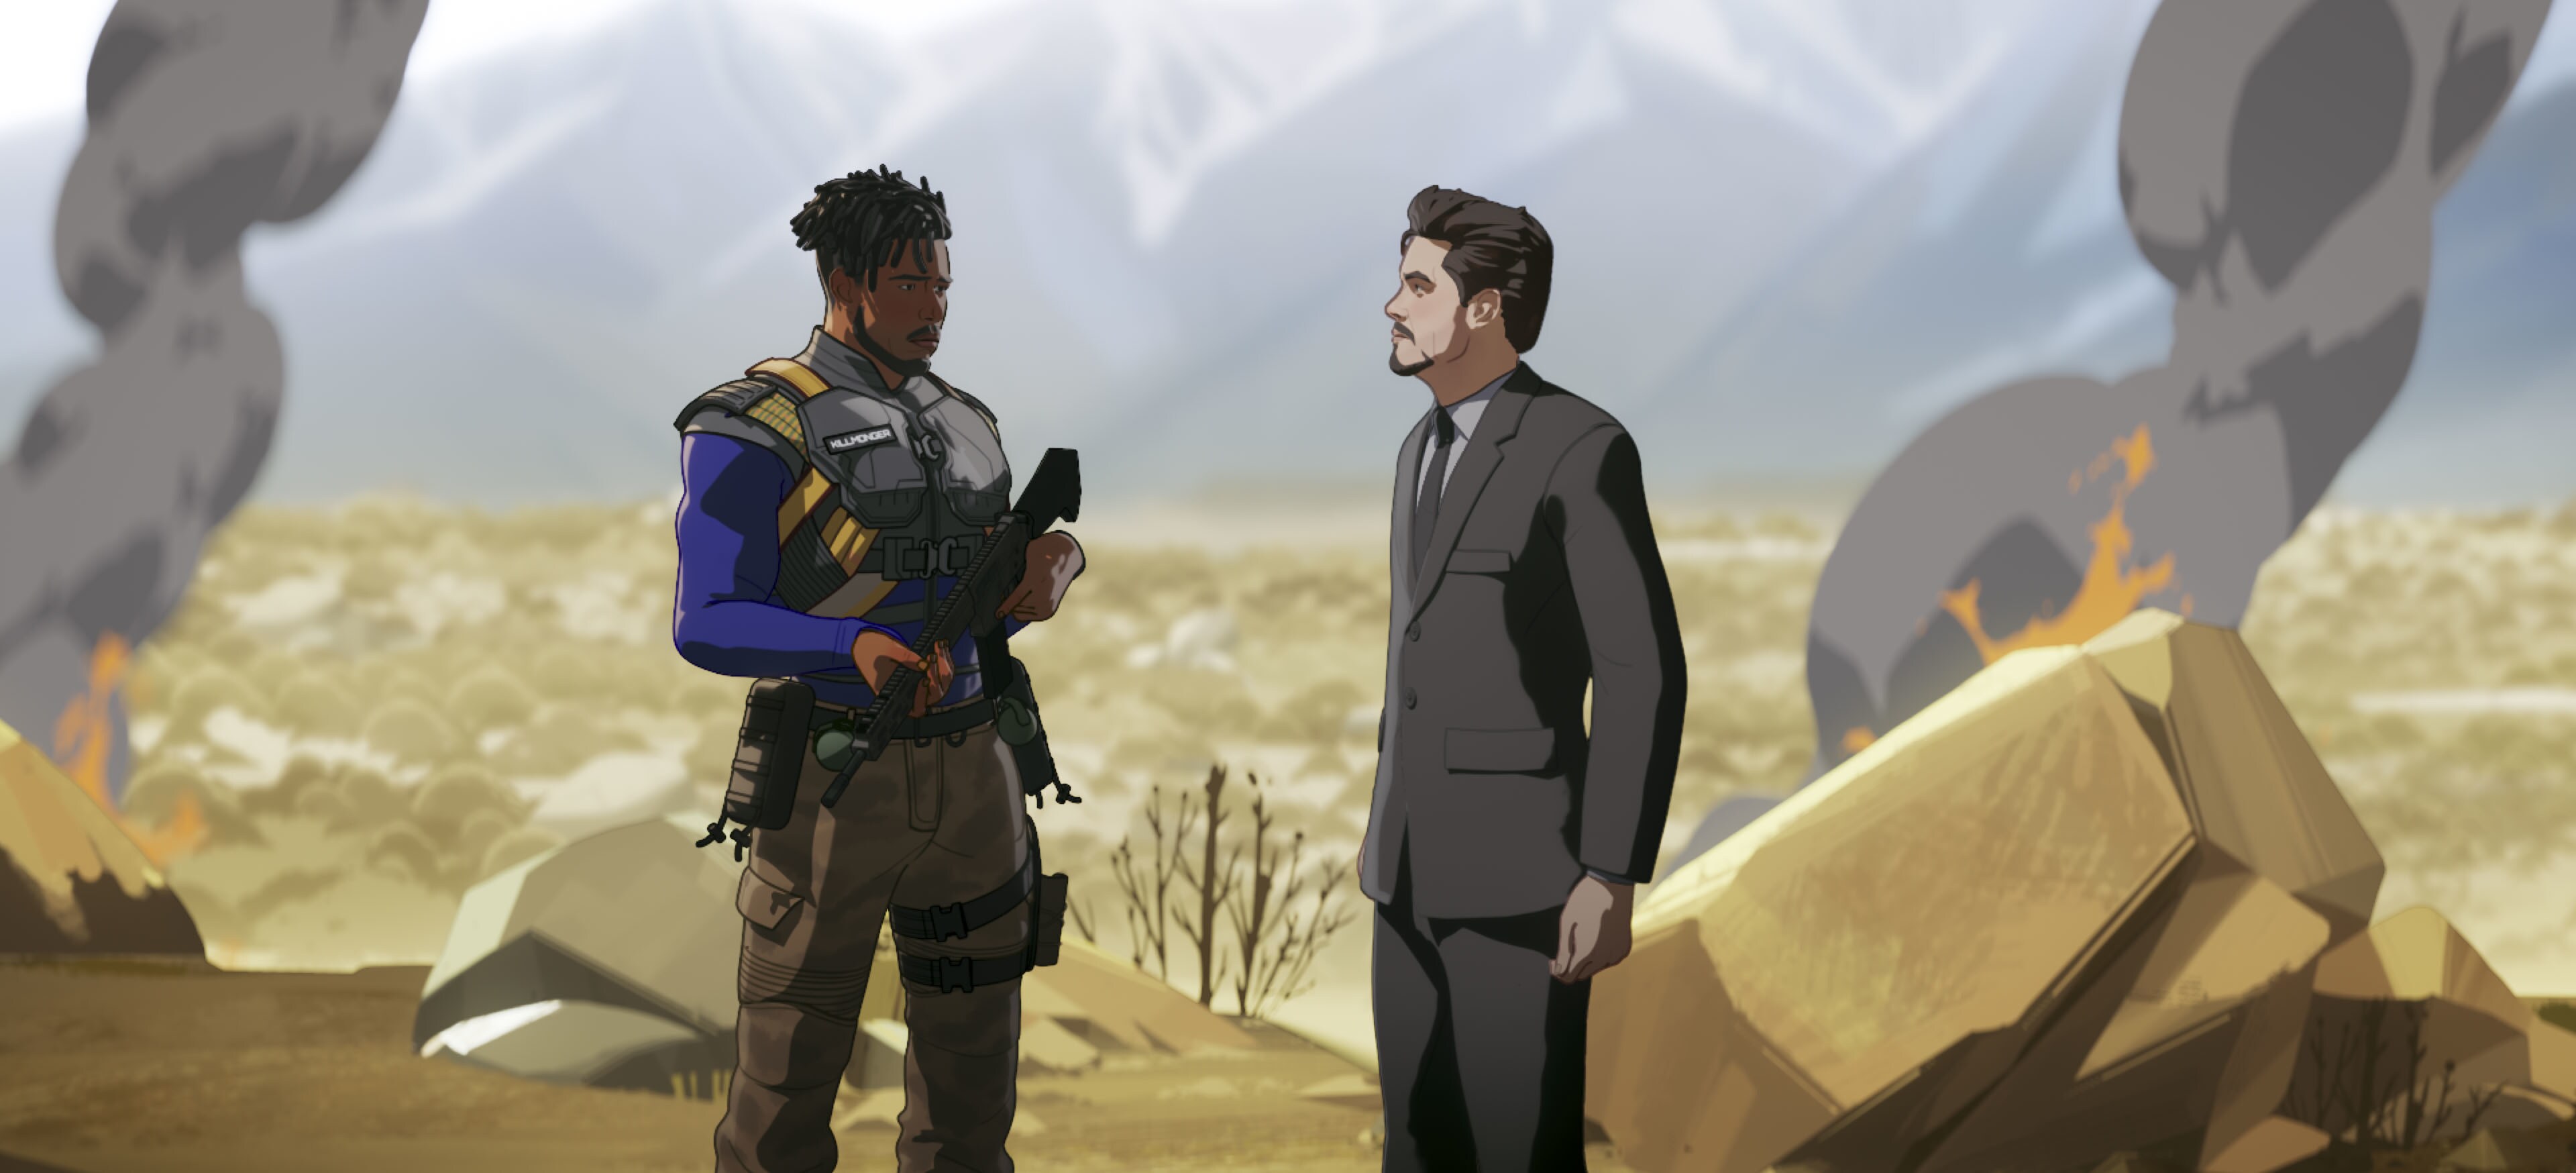 Killmonger and Tony Stark in Marvel Studios' WHAT IF…? exclusively on Disney+. ©Marvel Studios 2021. All Rights Reserved.